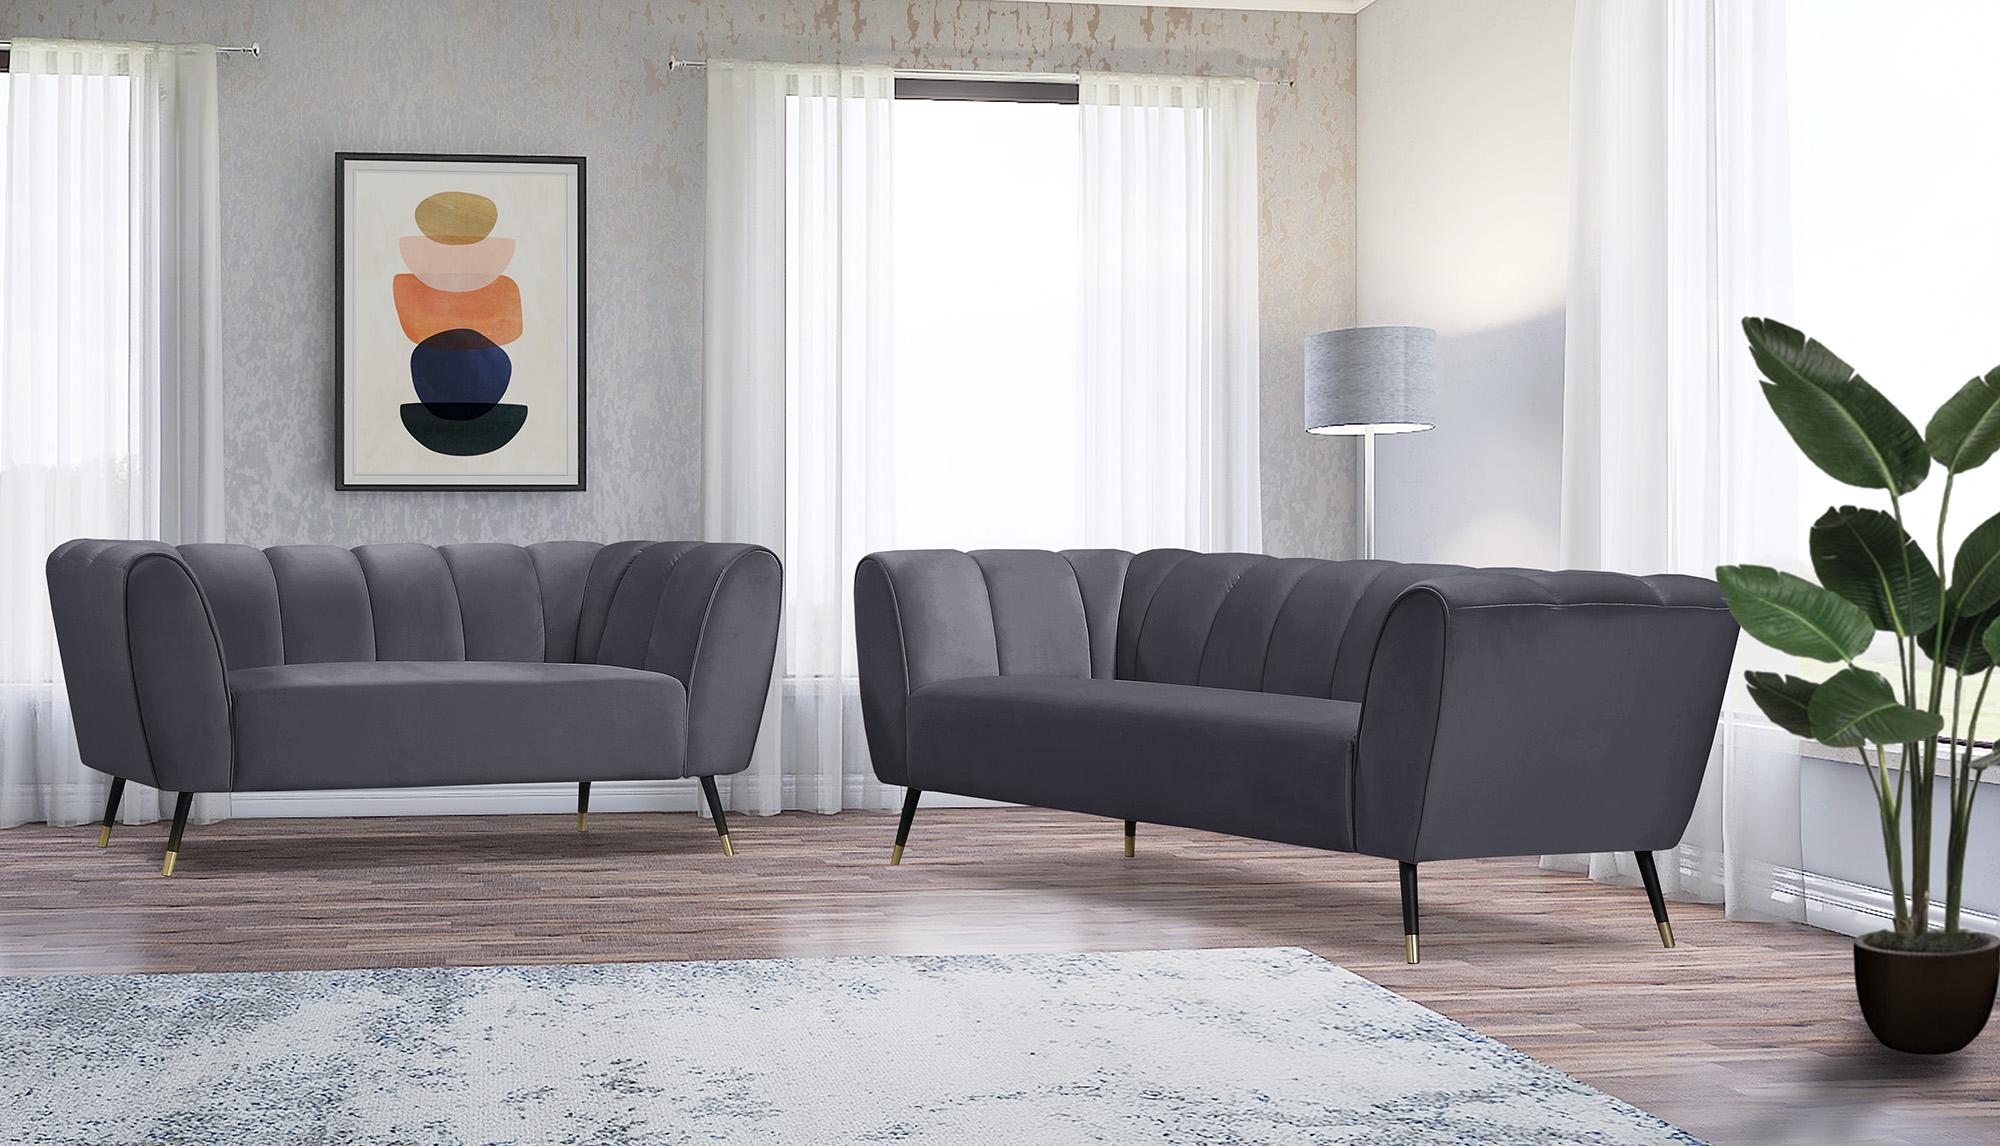 

    
626Grey-S Grey Velvet Channel Tufted Sofa BEAUMONT 626Grey-S Meridian Contemporary Modern
